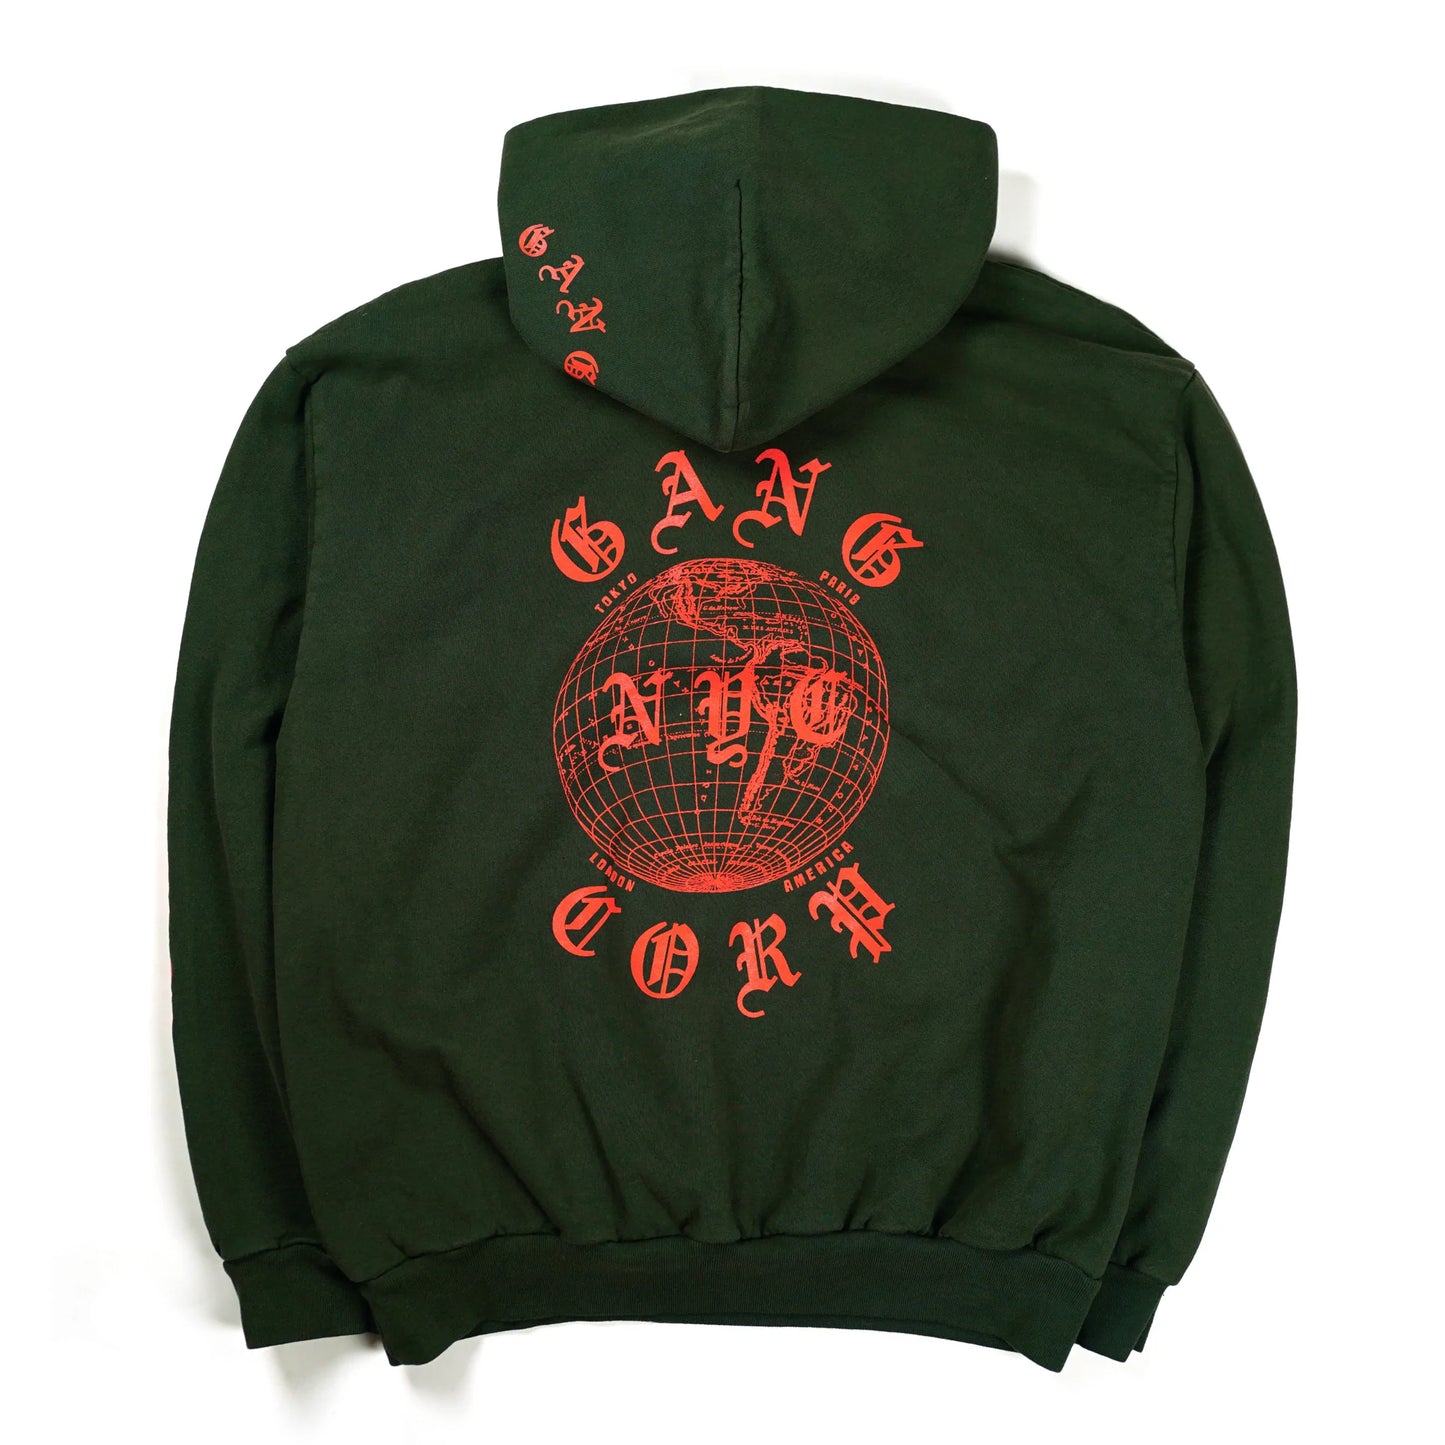 Gang Corp Global Hoodie Forest Green